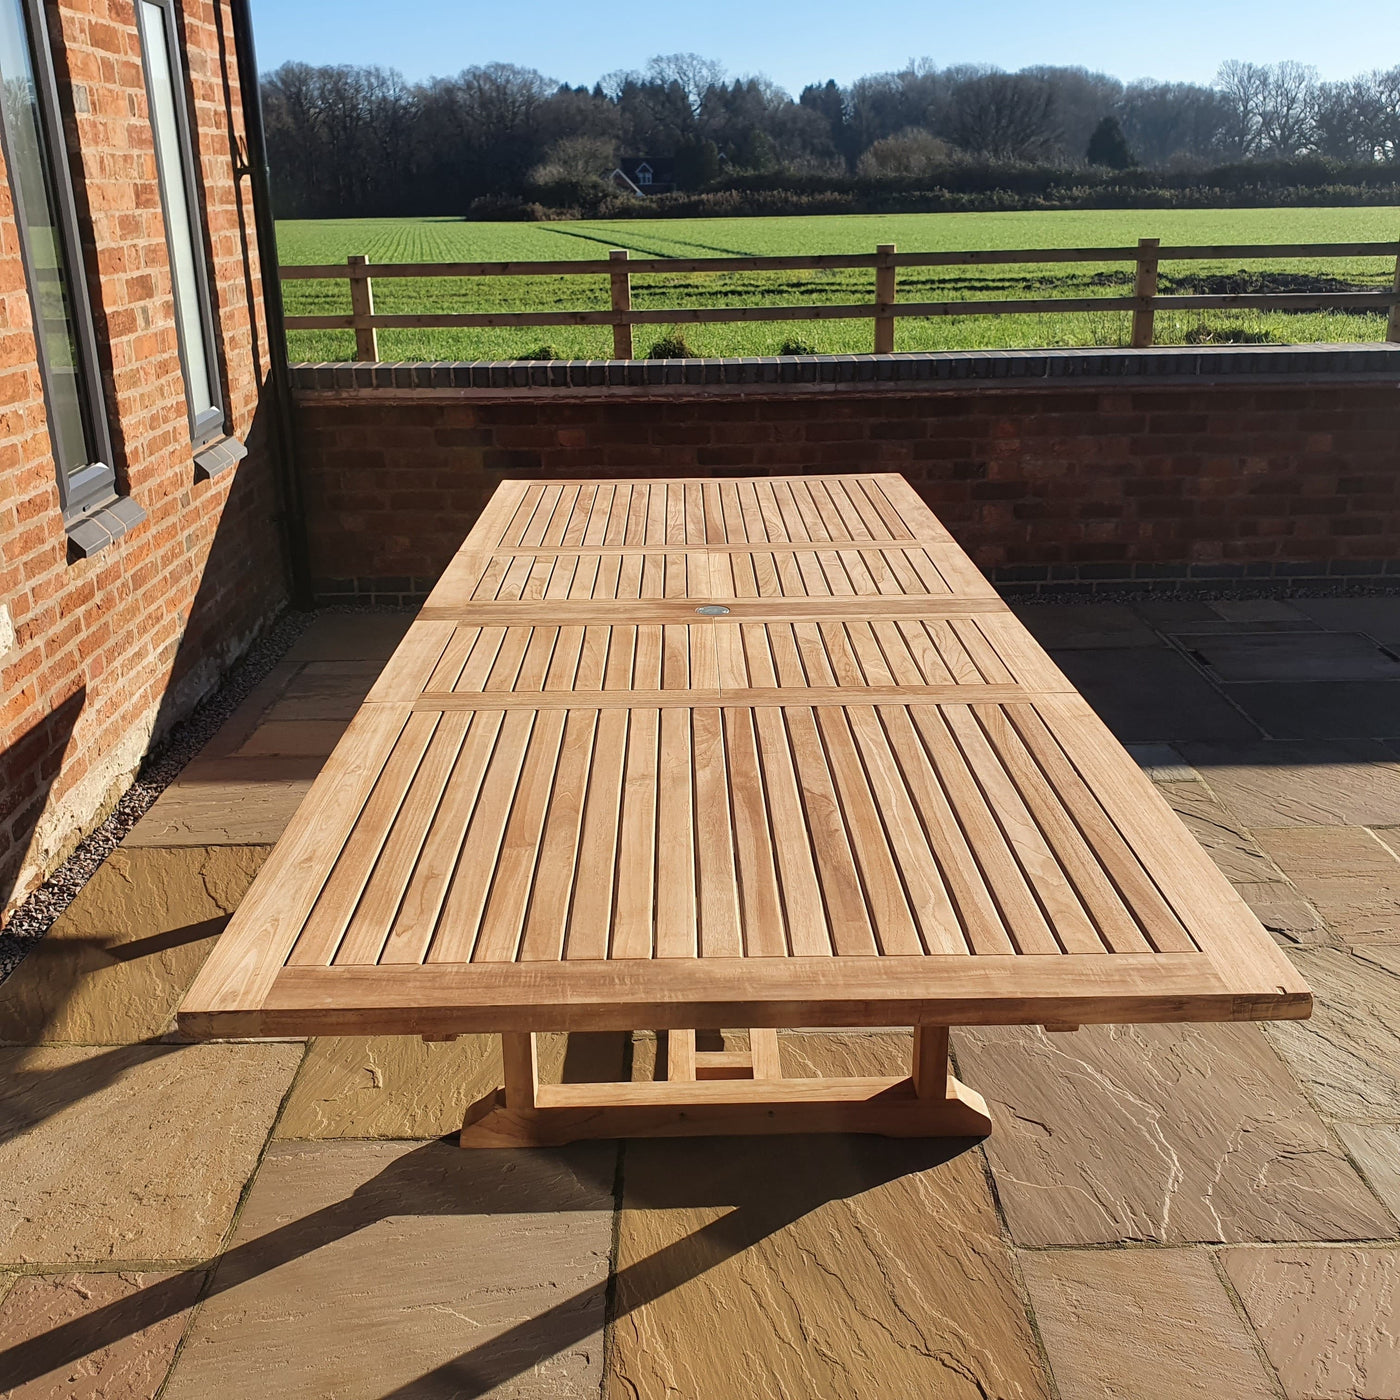 A Giant 2-3m Teak Extending Rectangle Table with 12 Oxford Stacking Chairs, complete set and cushions included, on a brick patio beside a red brick building, with a grassy field and trees in the background on a sunny day.